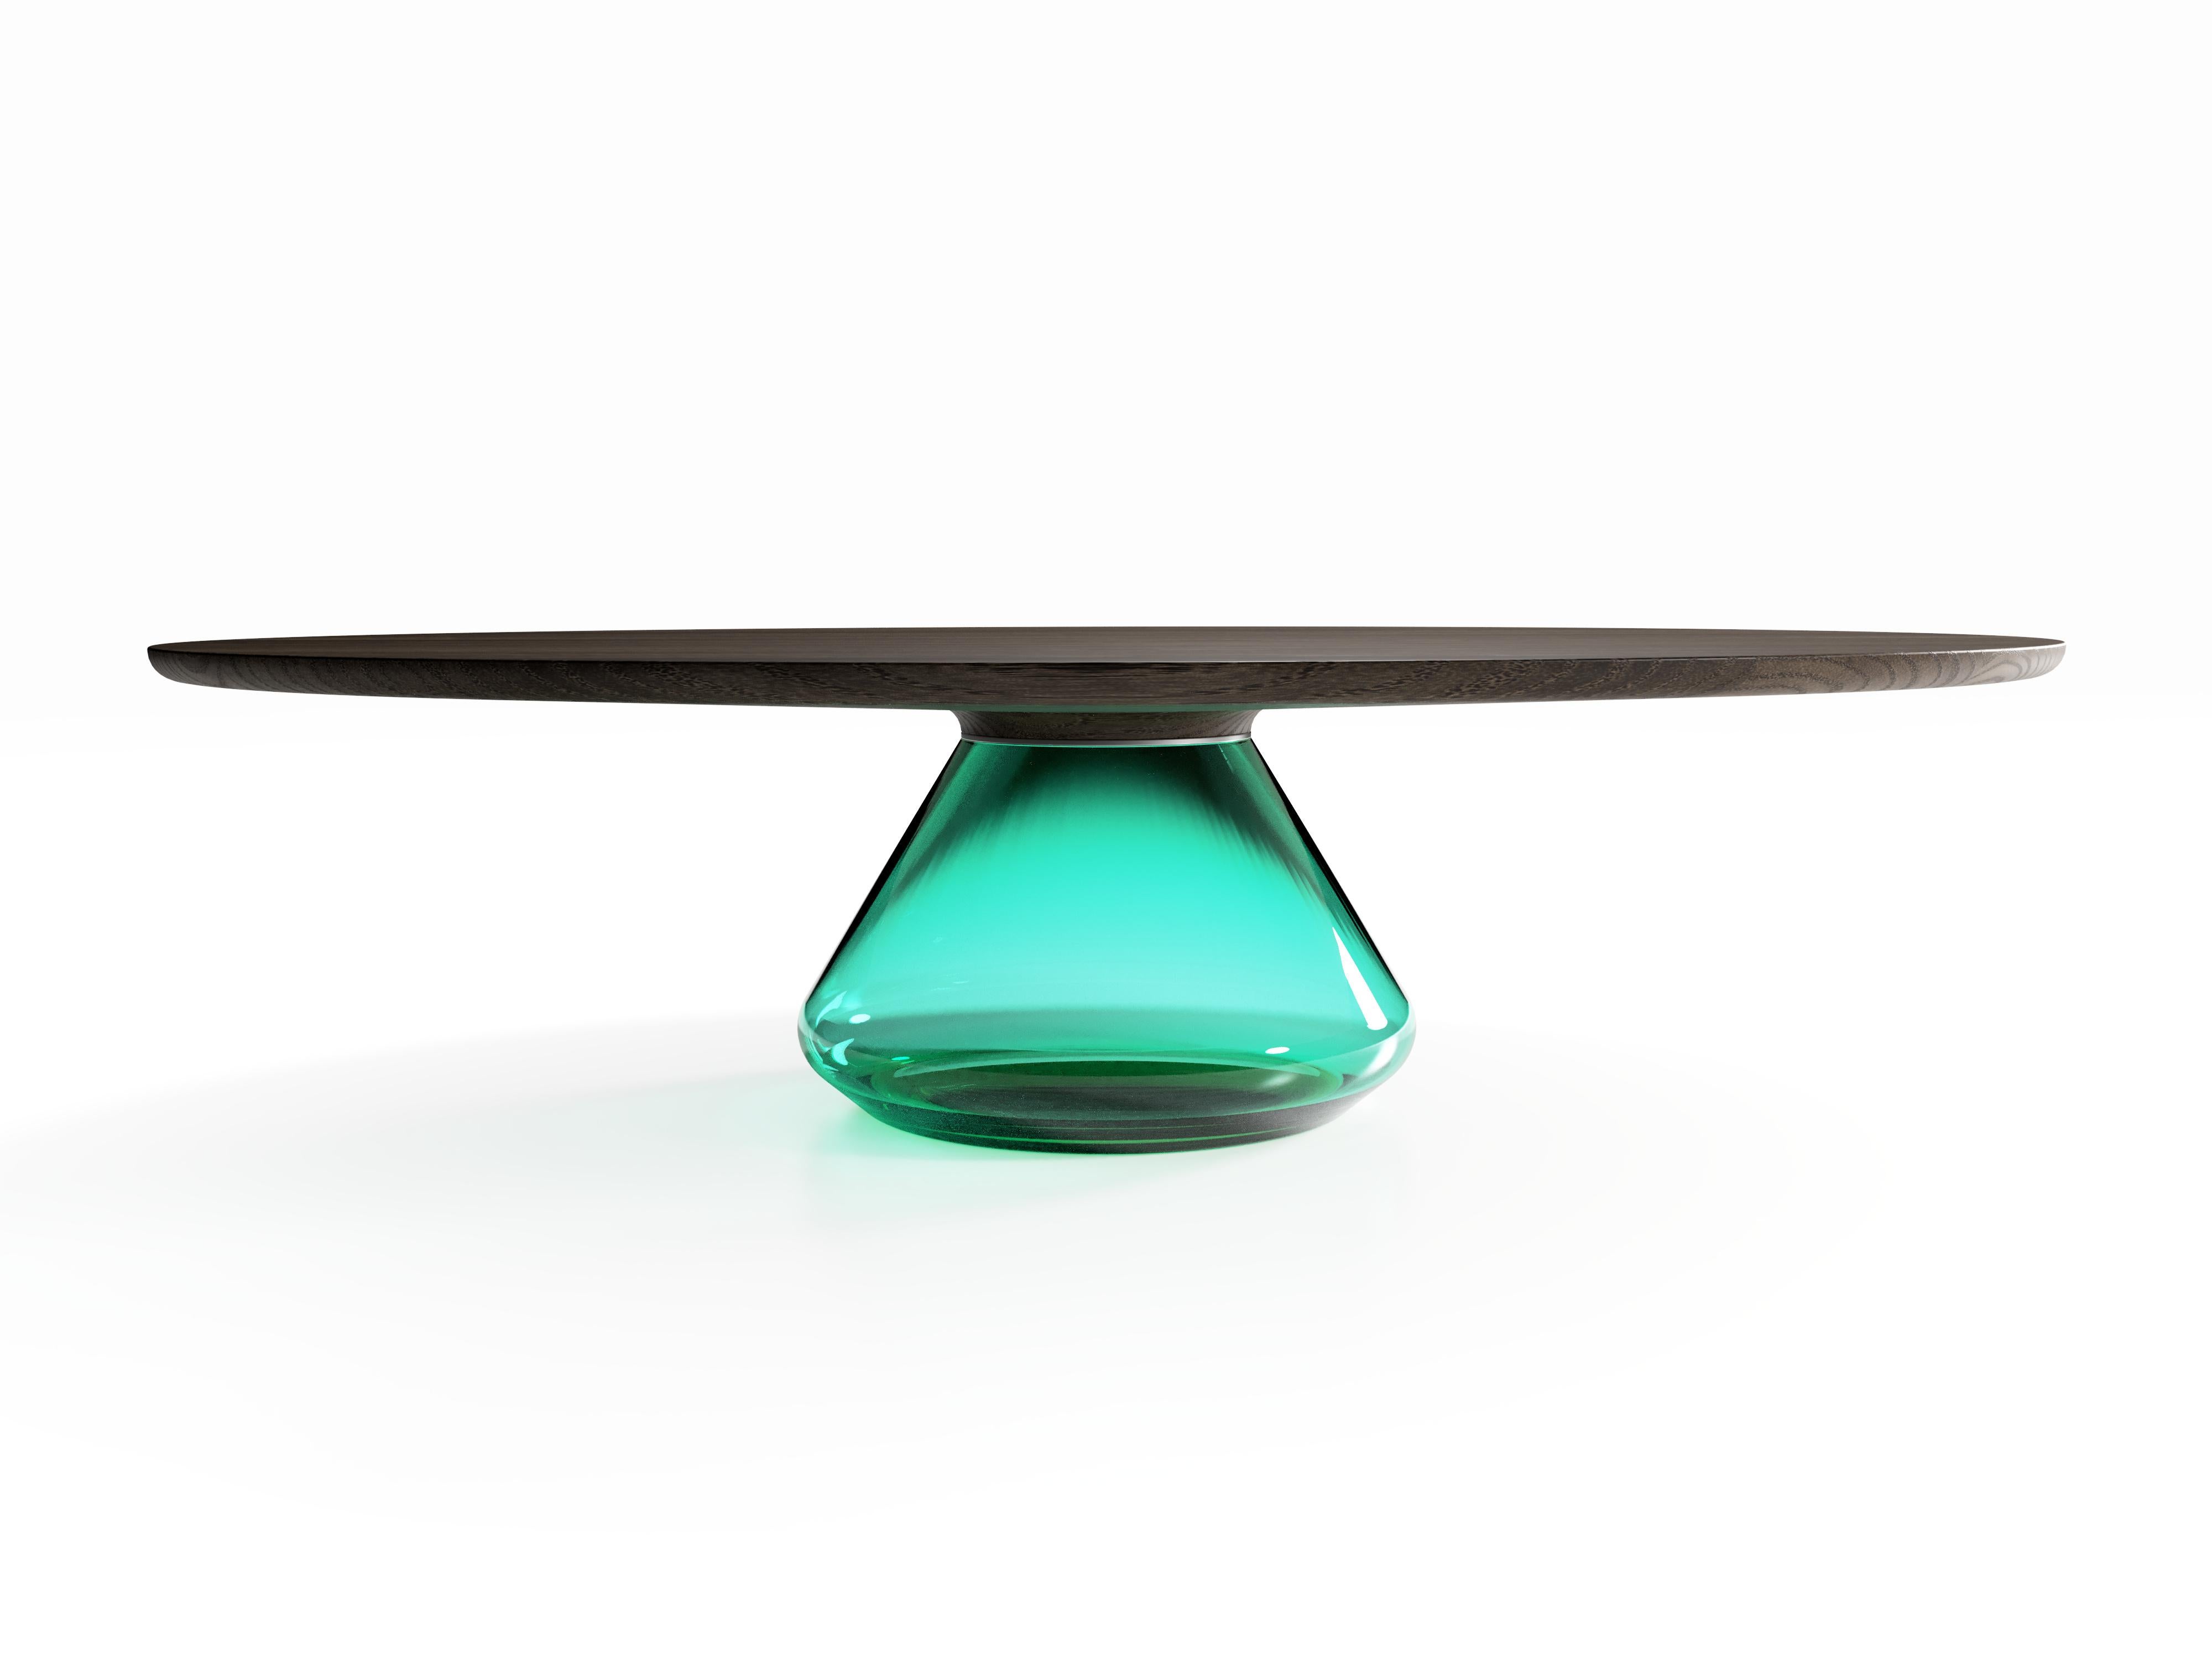 British The Emerald Eclipse I, Limited Edition Coffee Table by Grzegorz Majka